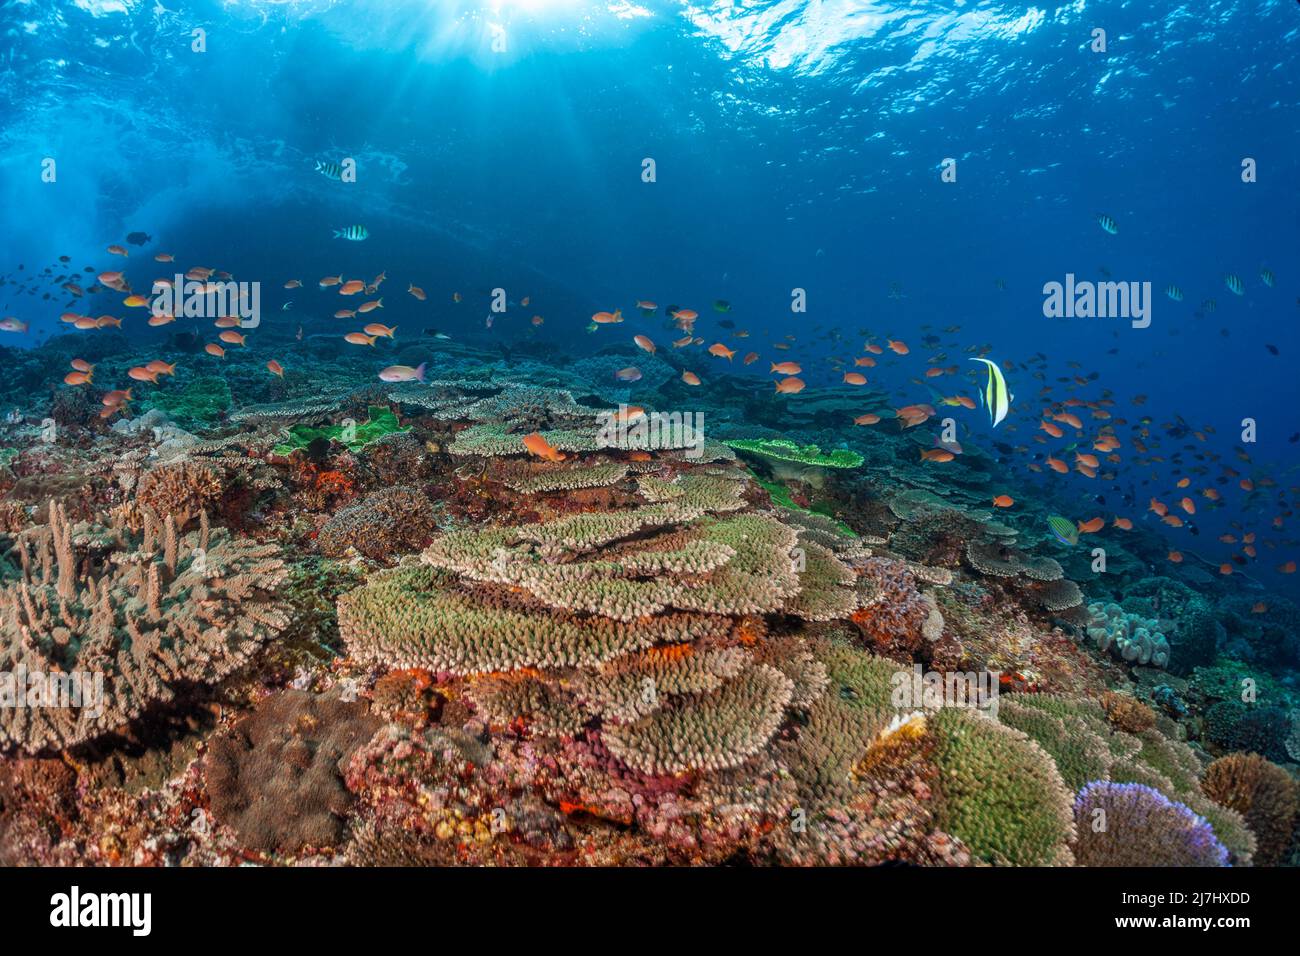 Hard coral along with schooling anthias and various reef fish, dominate this underwater scene, Crystal Bay, Nusa Penida, Bali Island, Indonesia, Pacif Stock Photo